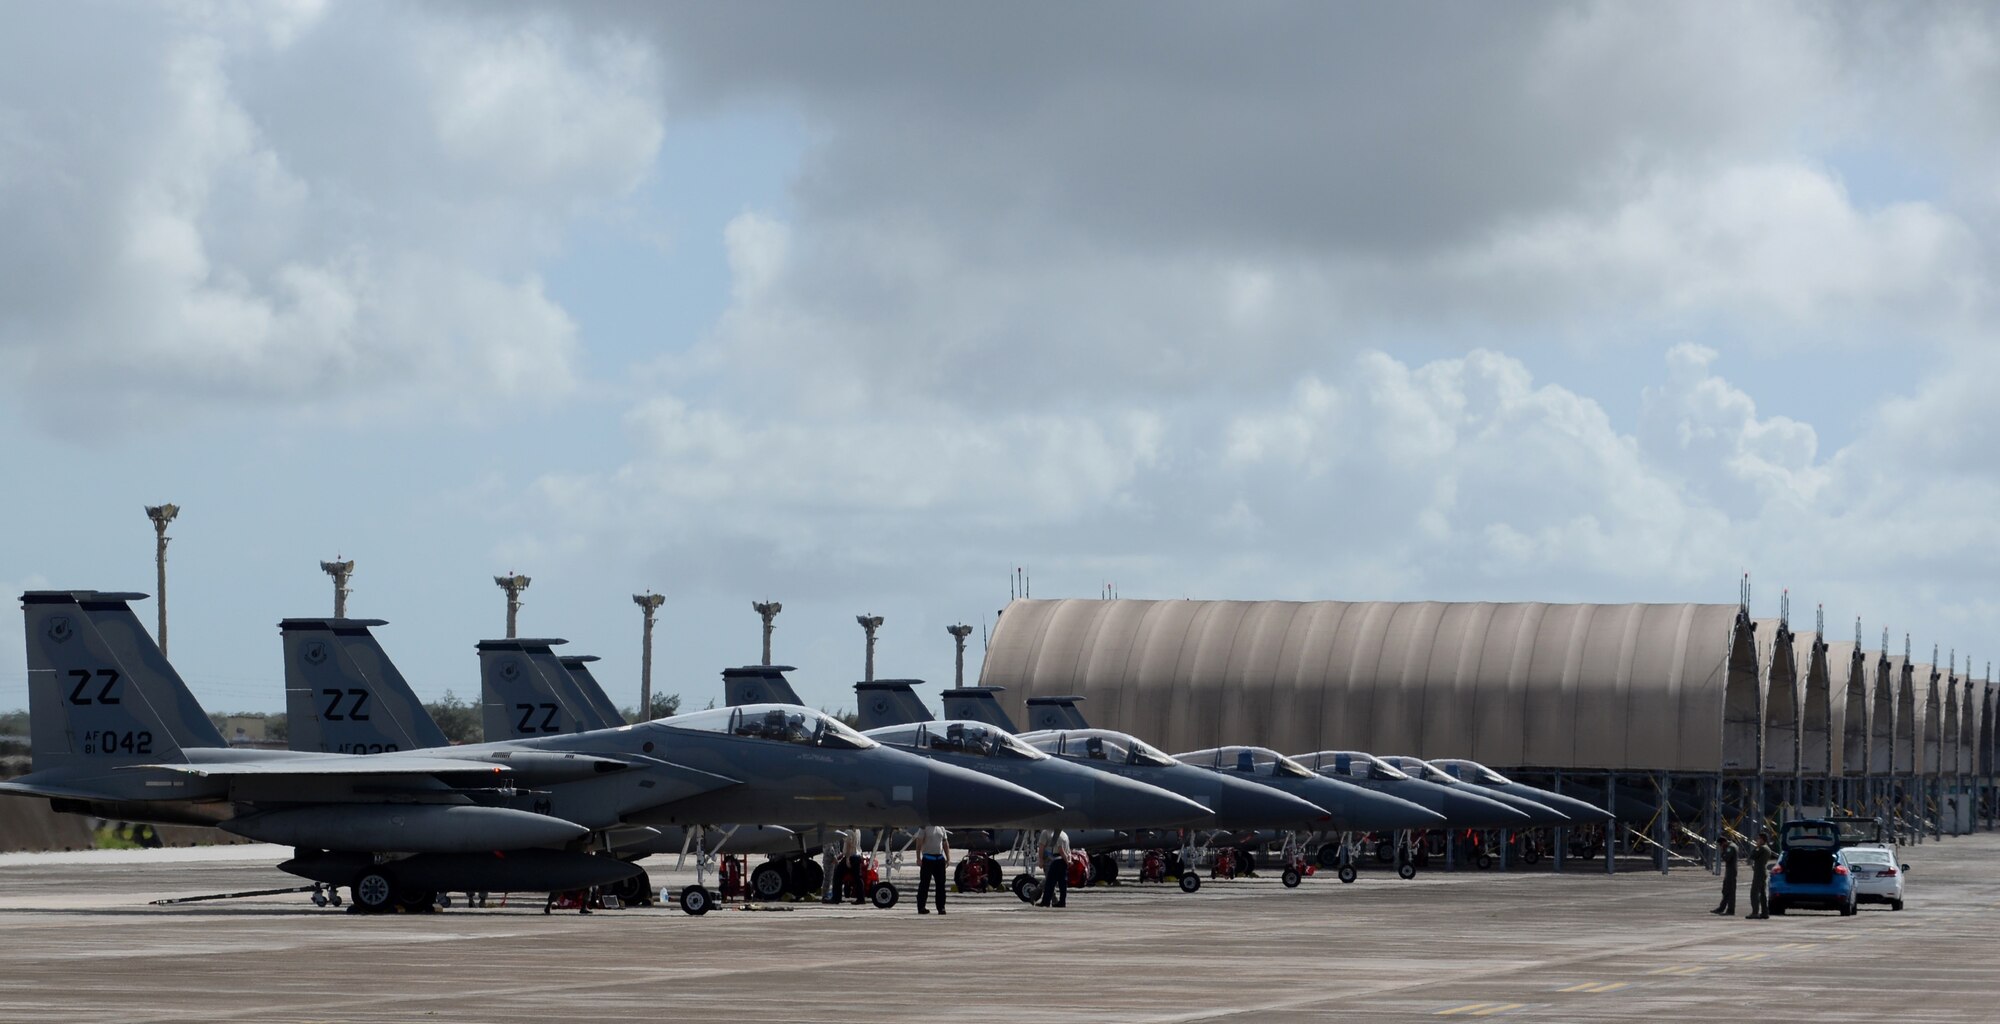 U.S. Air Force F-15 Eagles, assigned to Kadena Air Base, Japan, sit on the flightline, April 20, 2017, at Andersen Air Force Base, Guam. Fighters from Kadena AB deployed alongside Republic of Singapore Air Force fighters to conduct bilateral training in the Pacific during Exercise Vigilant Ace. (U.S. Air Force/Airman 1st Class Gerald R. Willis)